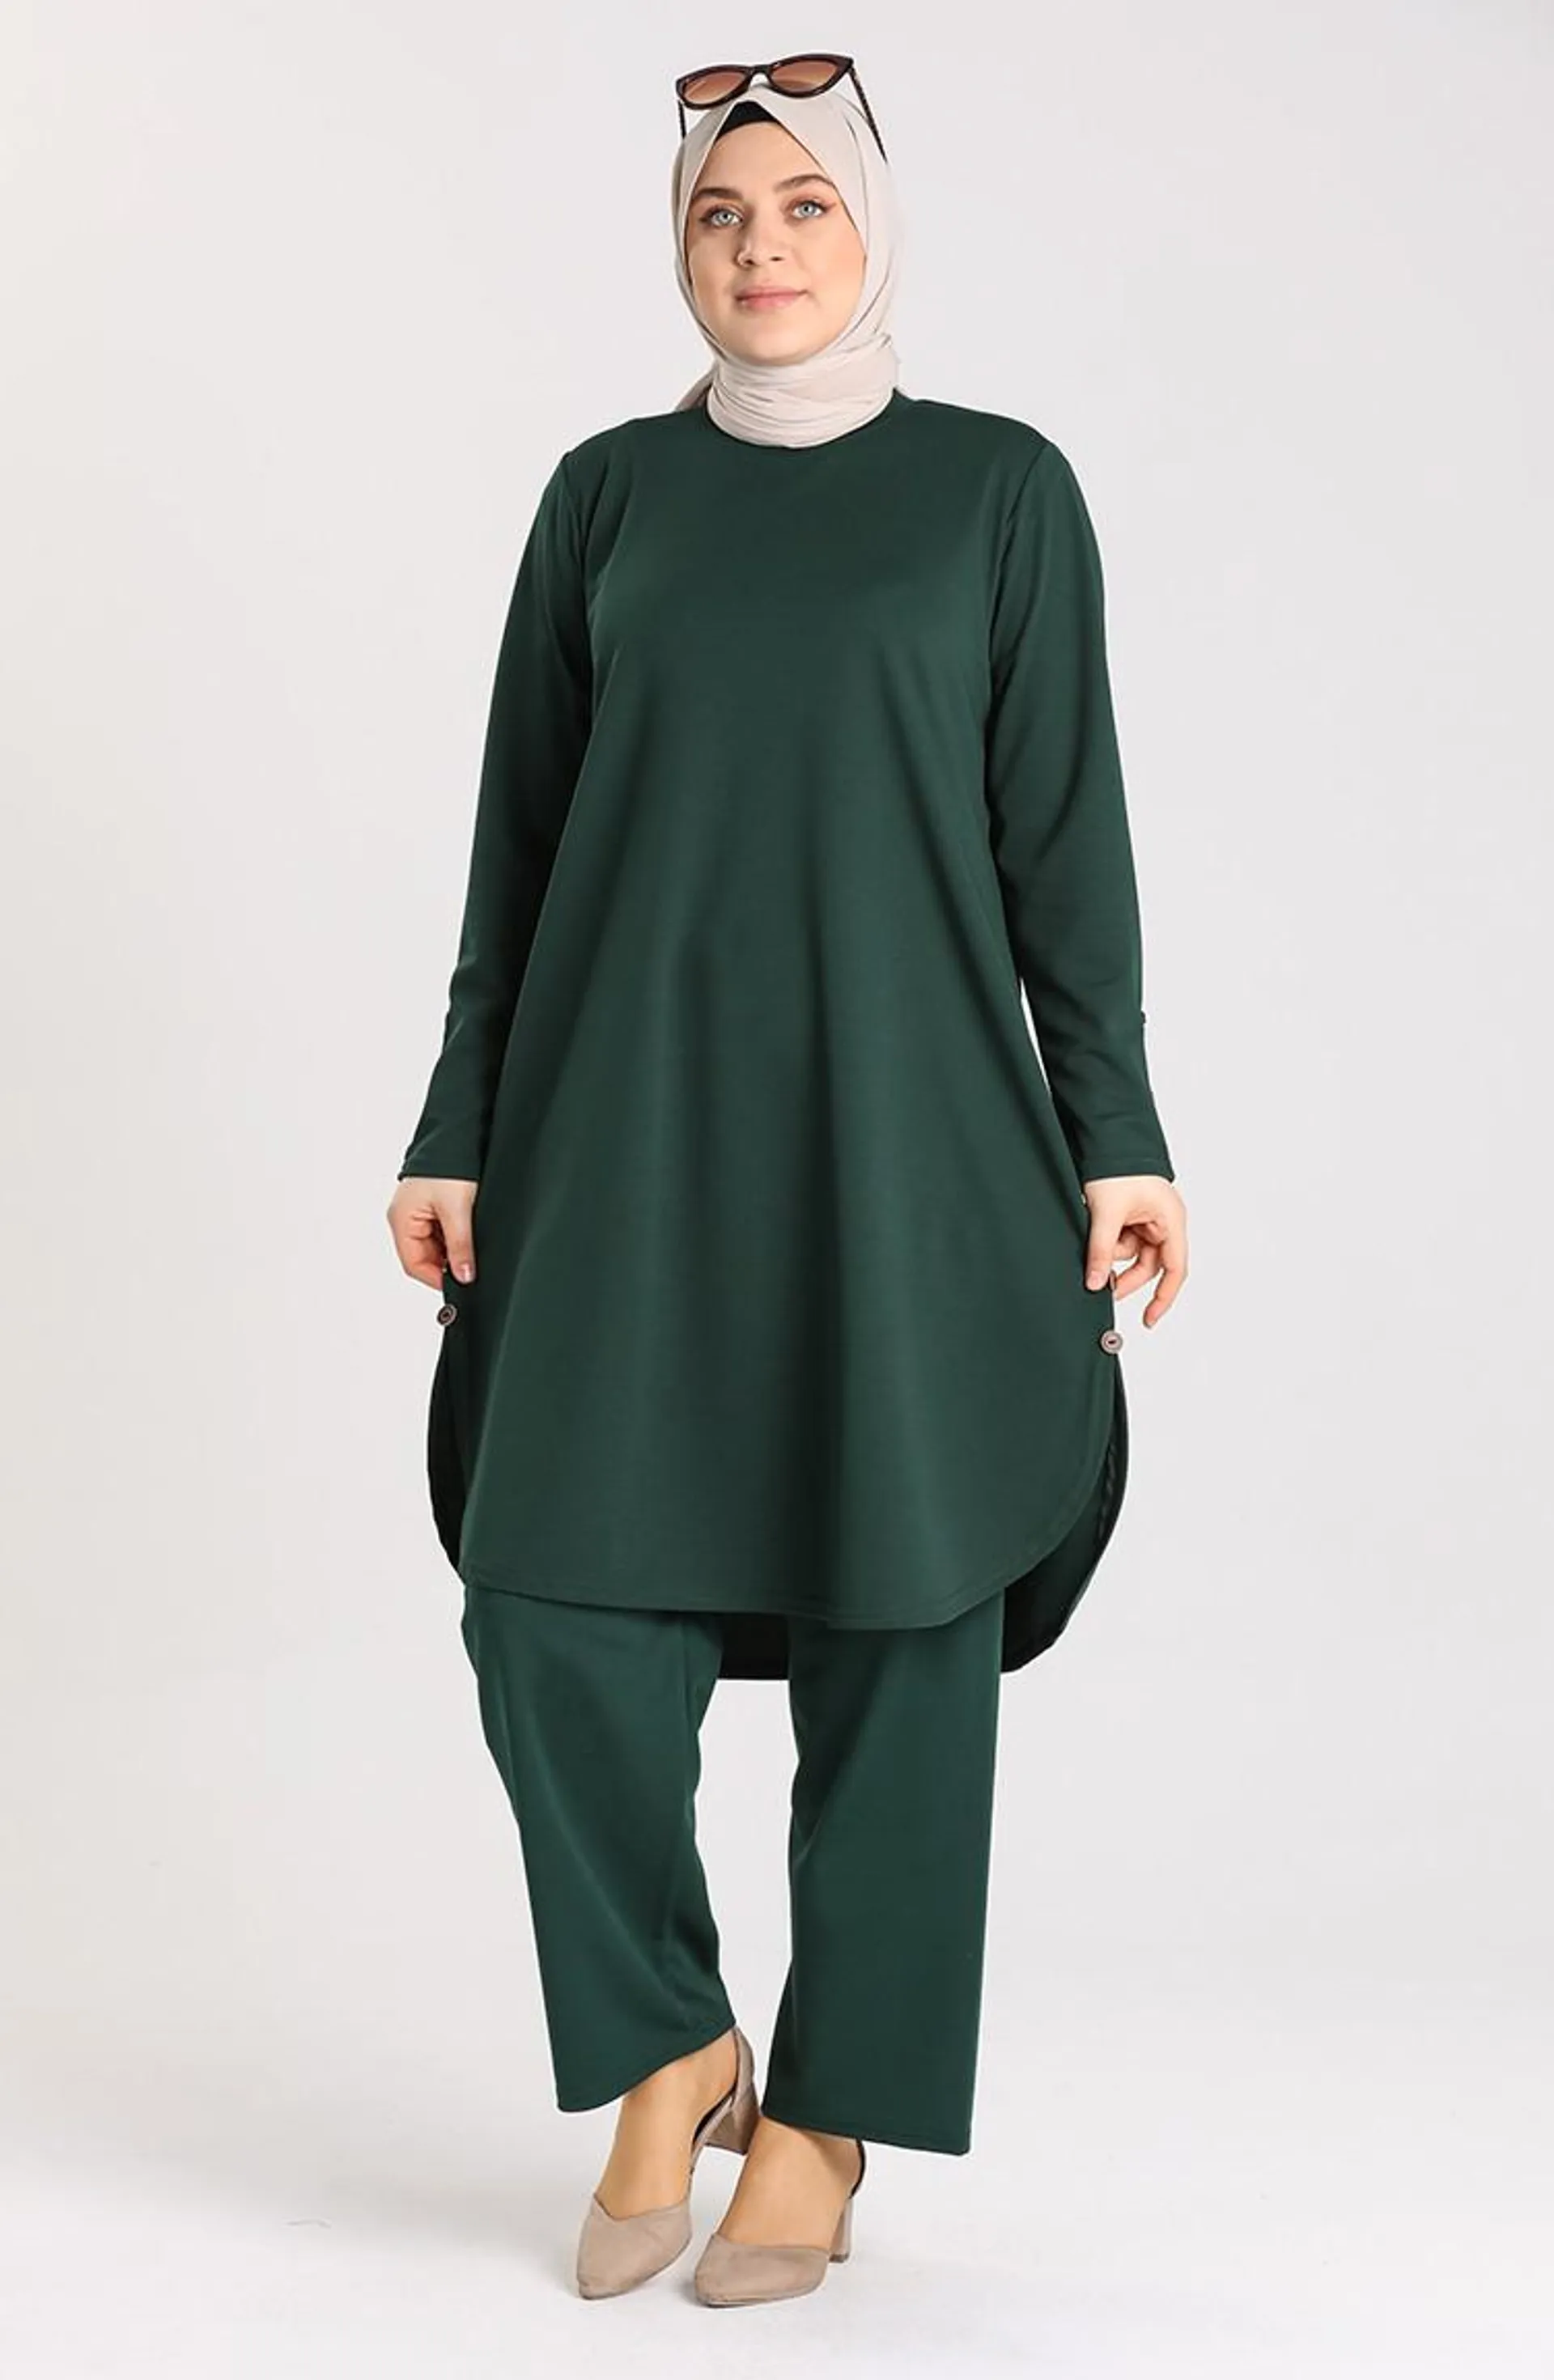 Plus Size Tunic Trousers Double Suit 2655a-01 Emerald Green 2655A-01